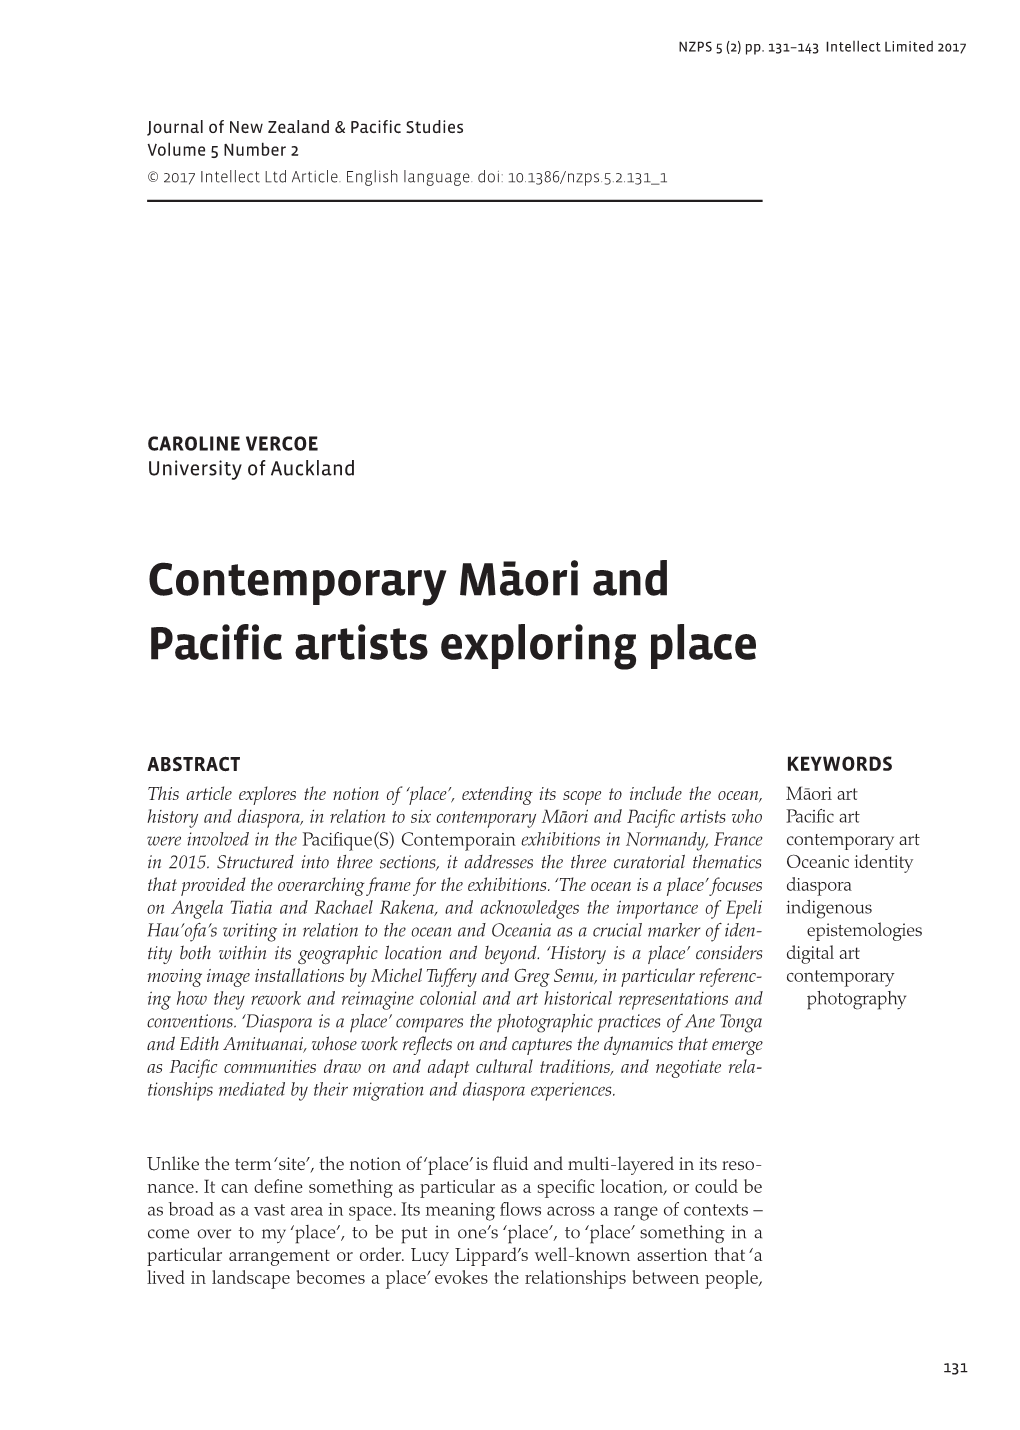 Contemporary Ma¯Ori and Pacific Artists Exploring Place